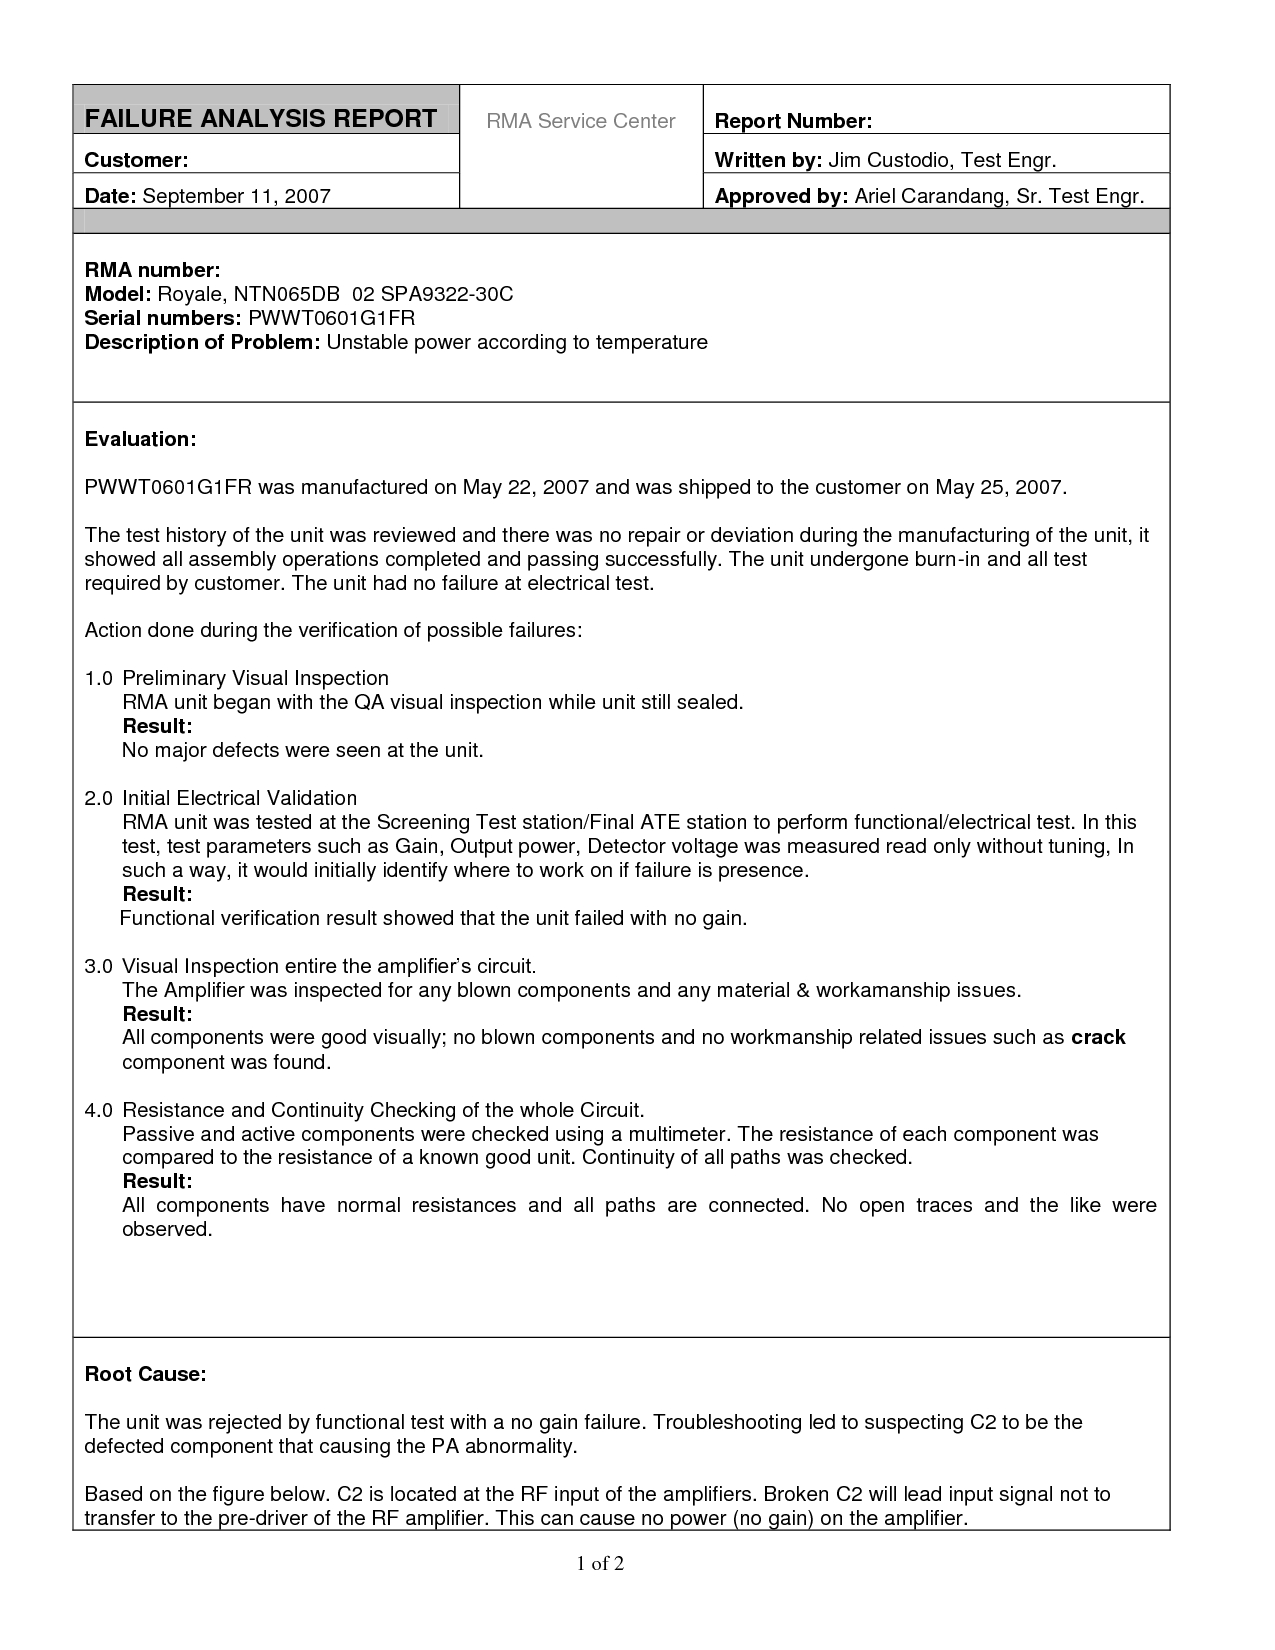 Inspirational Failure Analysis Report Template Sample With In Rma Report Template